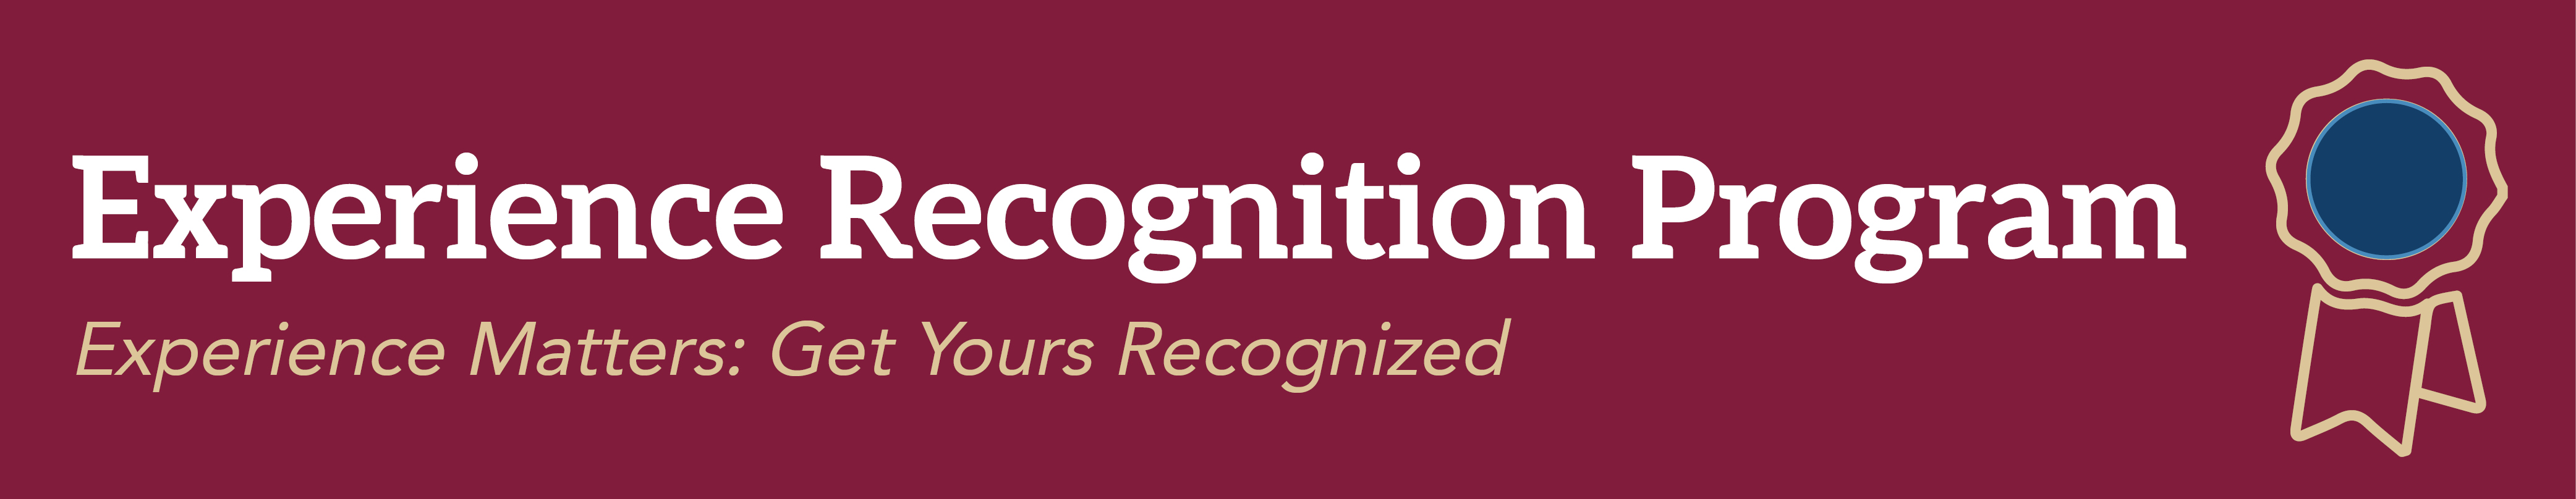 Experience Recognition Program